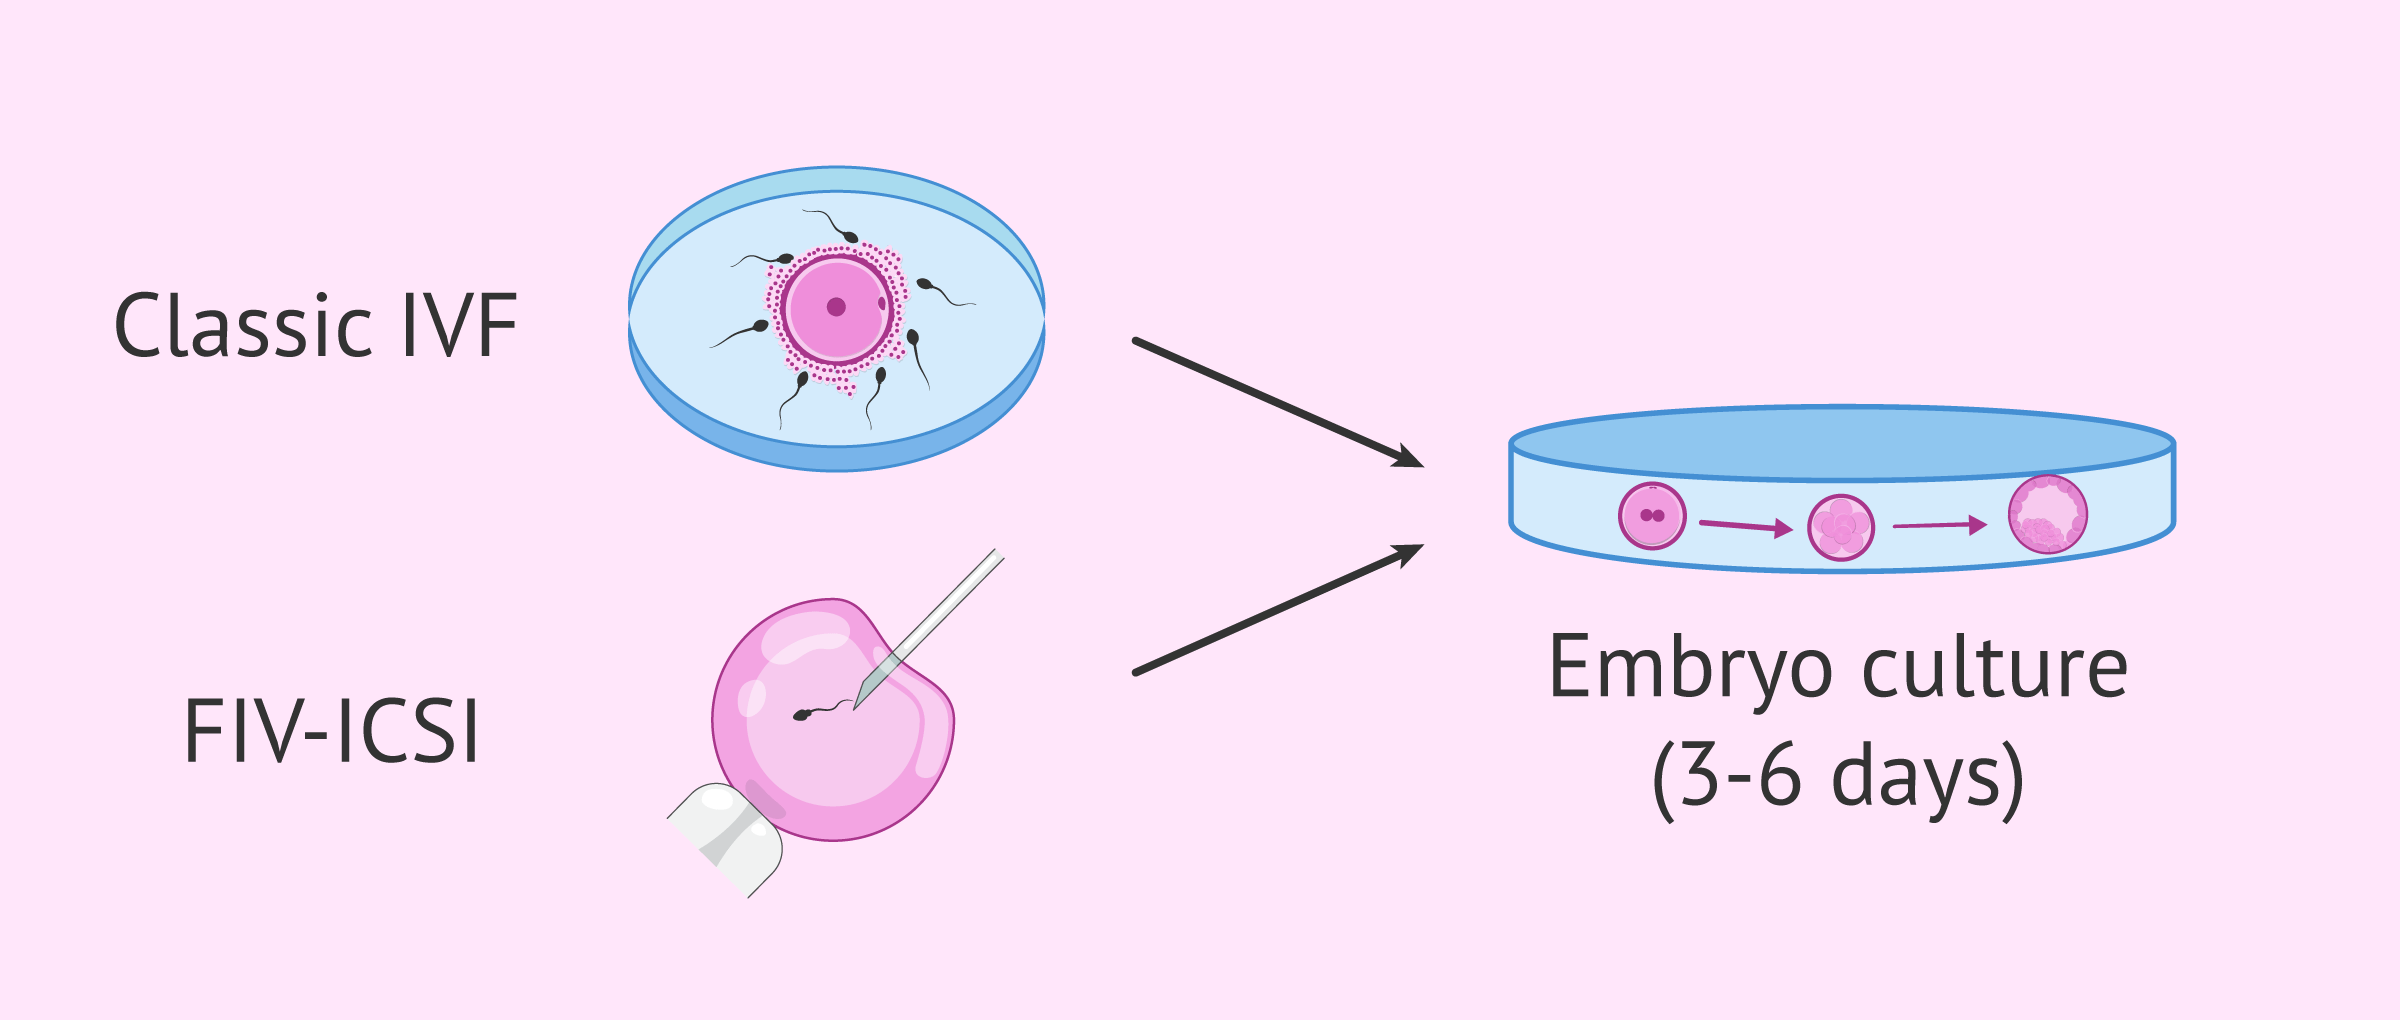 Types of fertilization and embryo culture